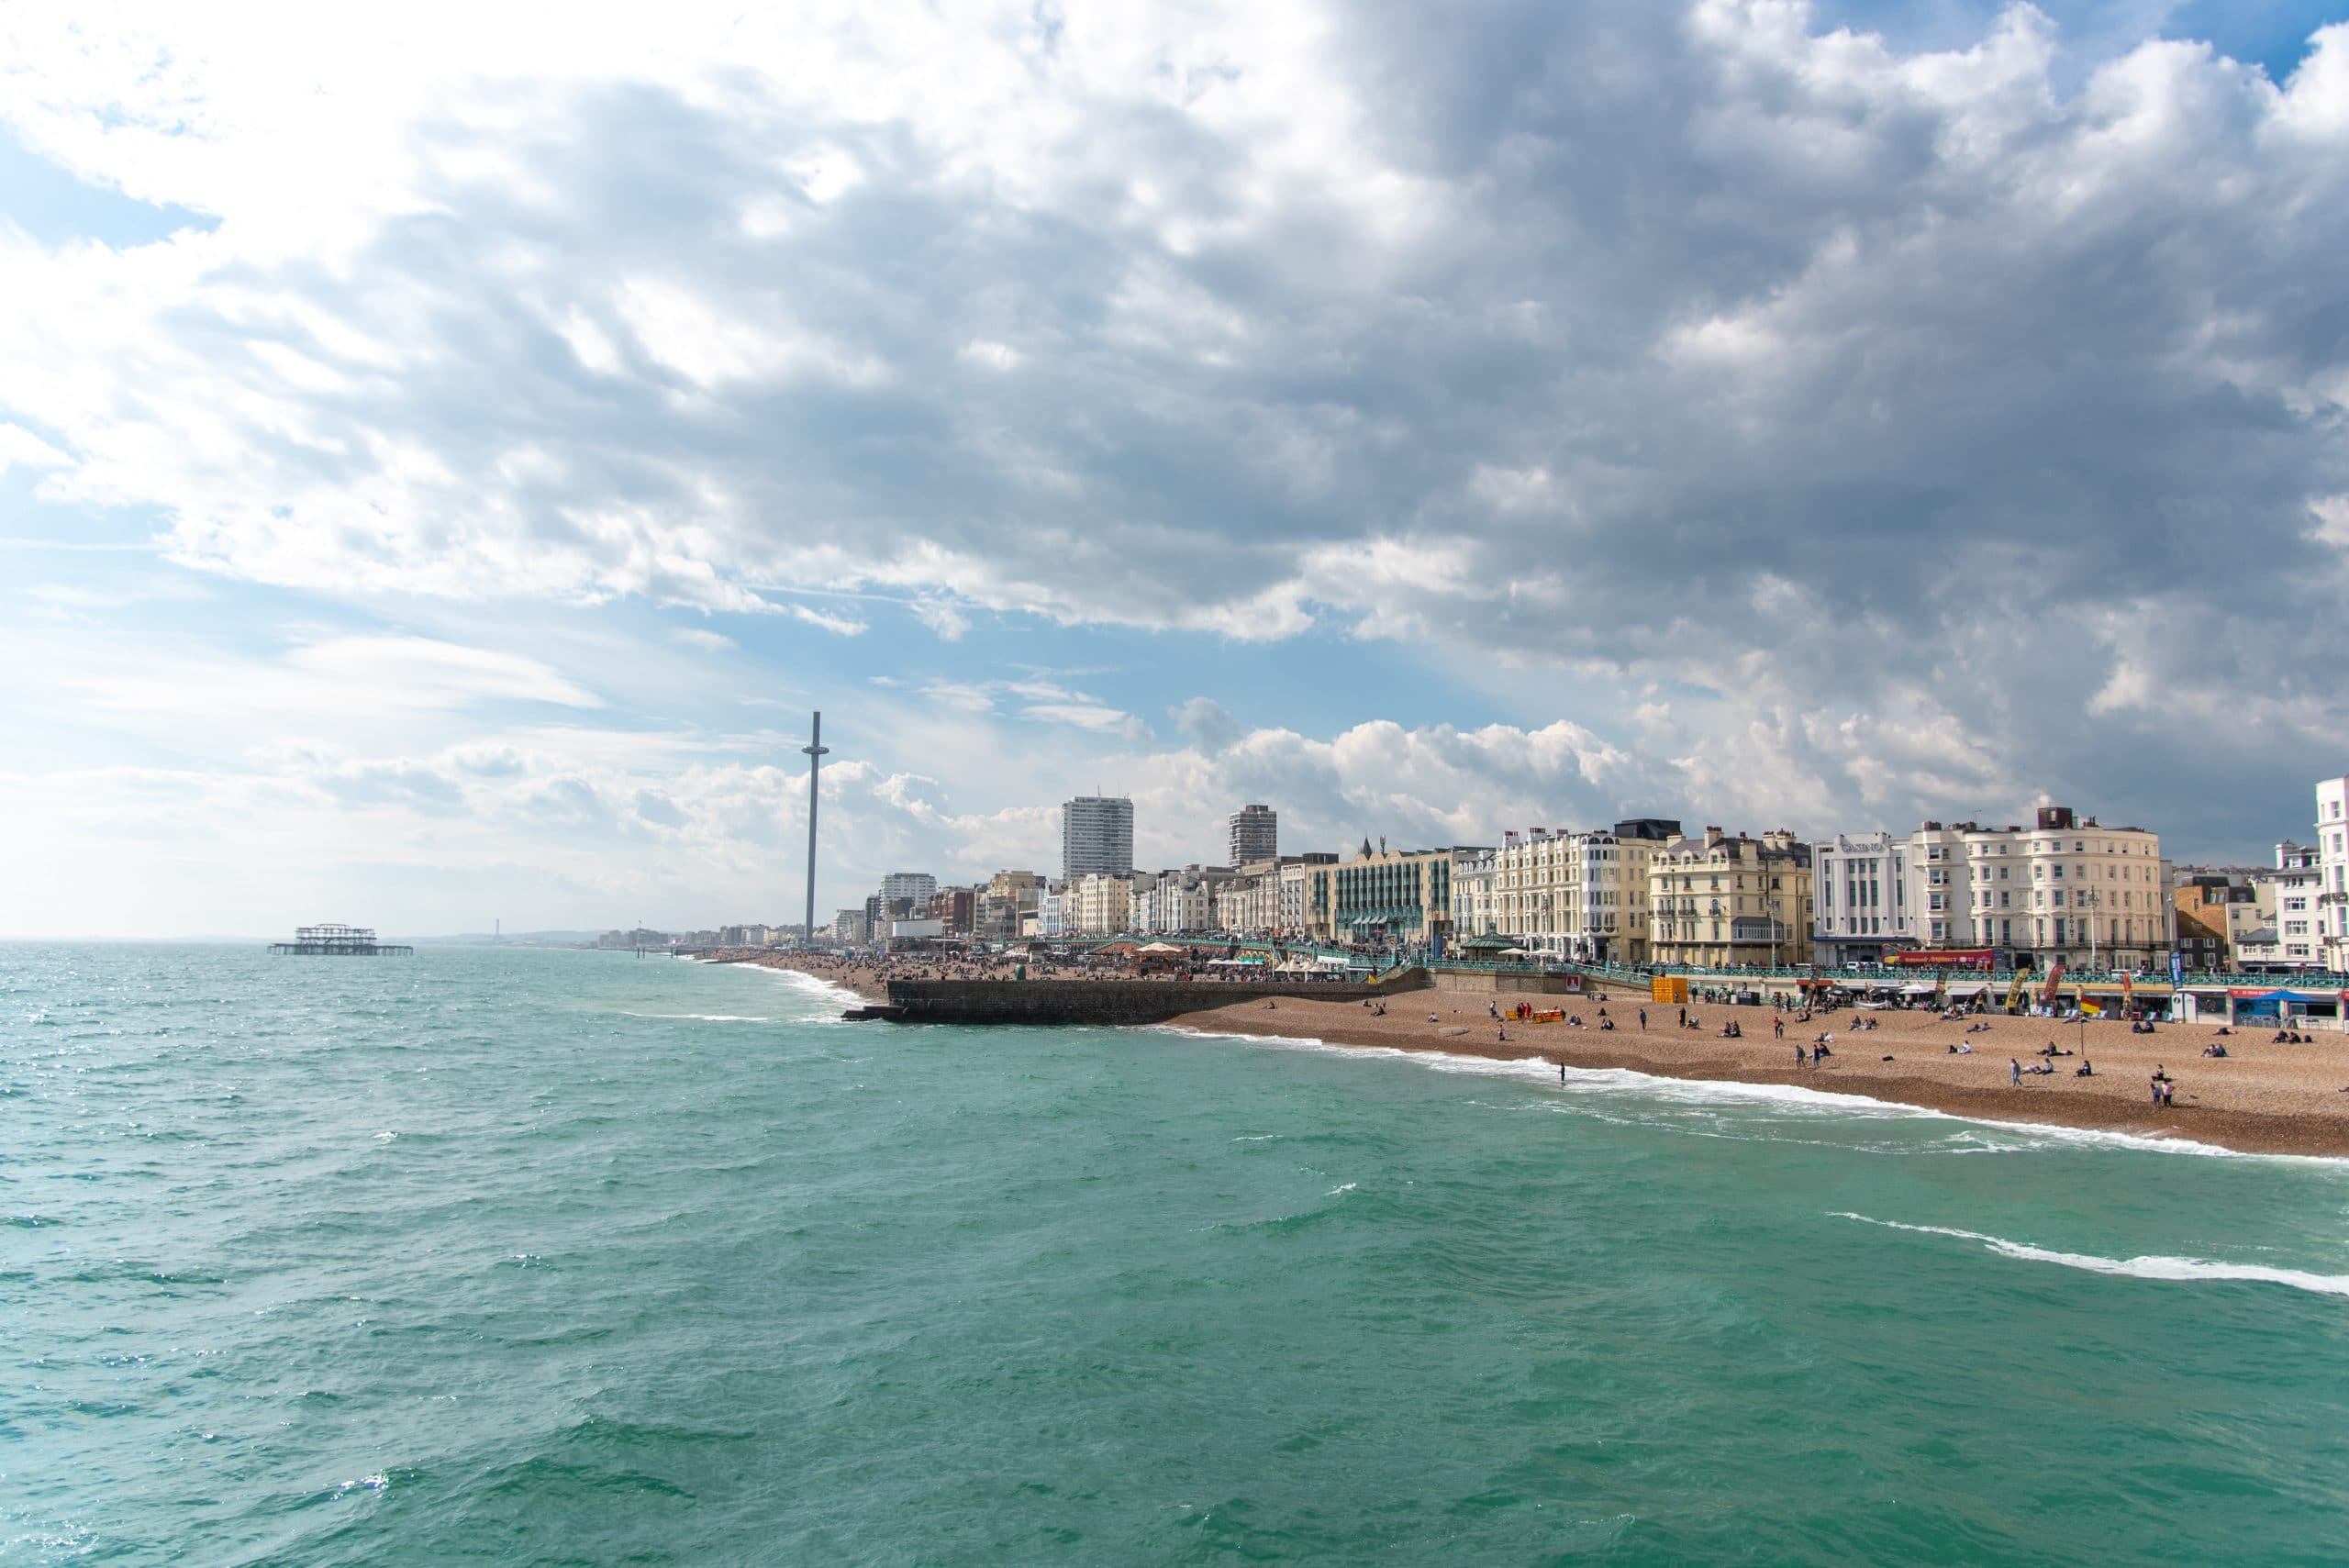 Brighton seafront on a cloudy day with the pier and beach in clear view.